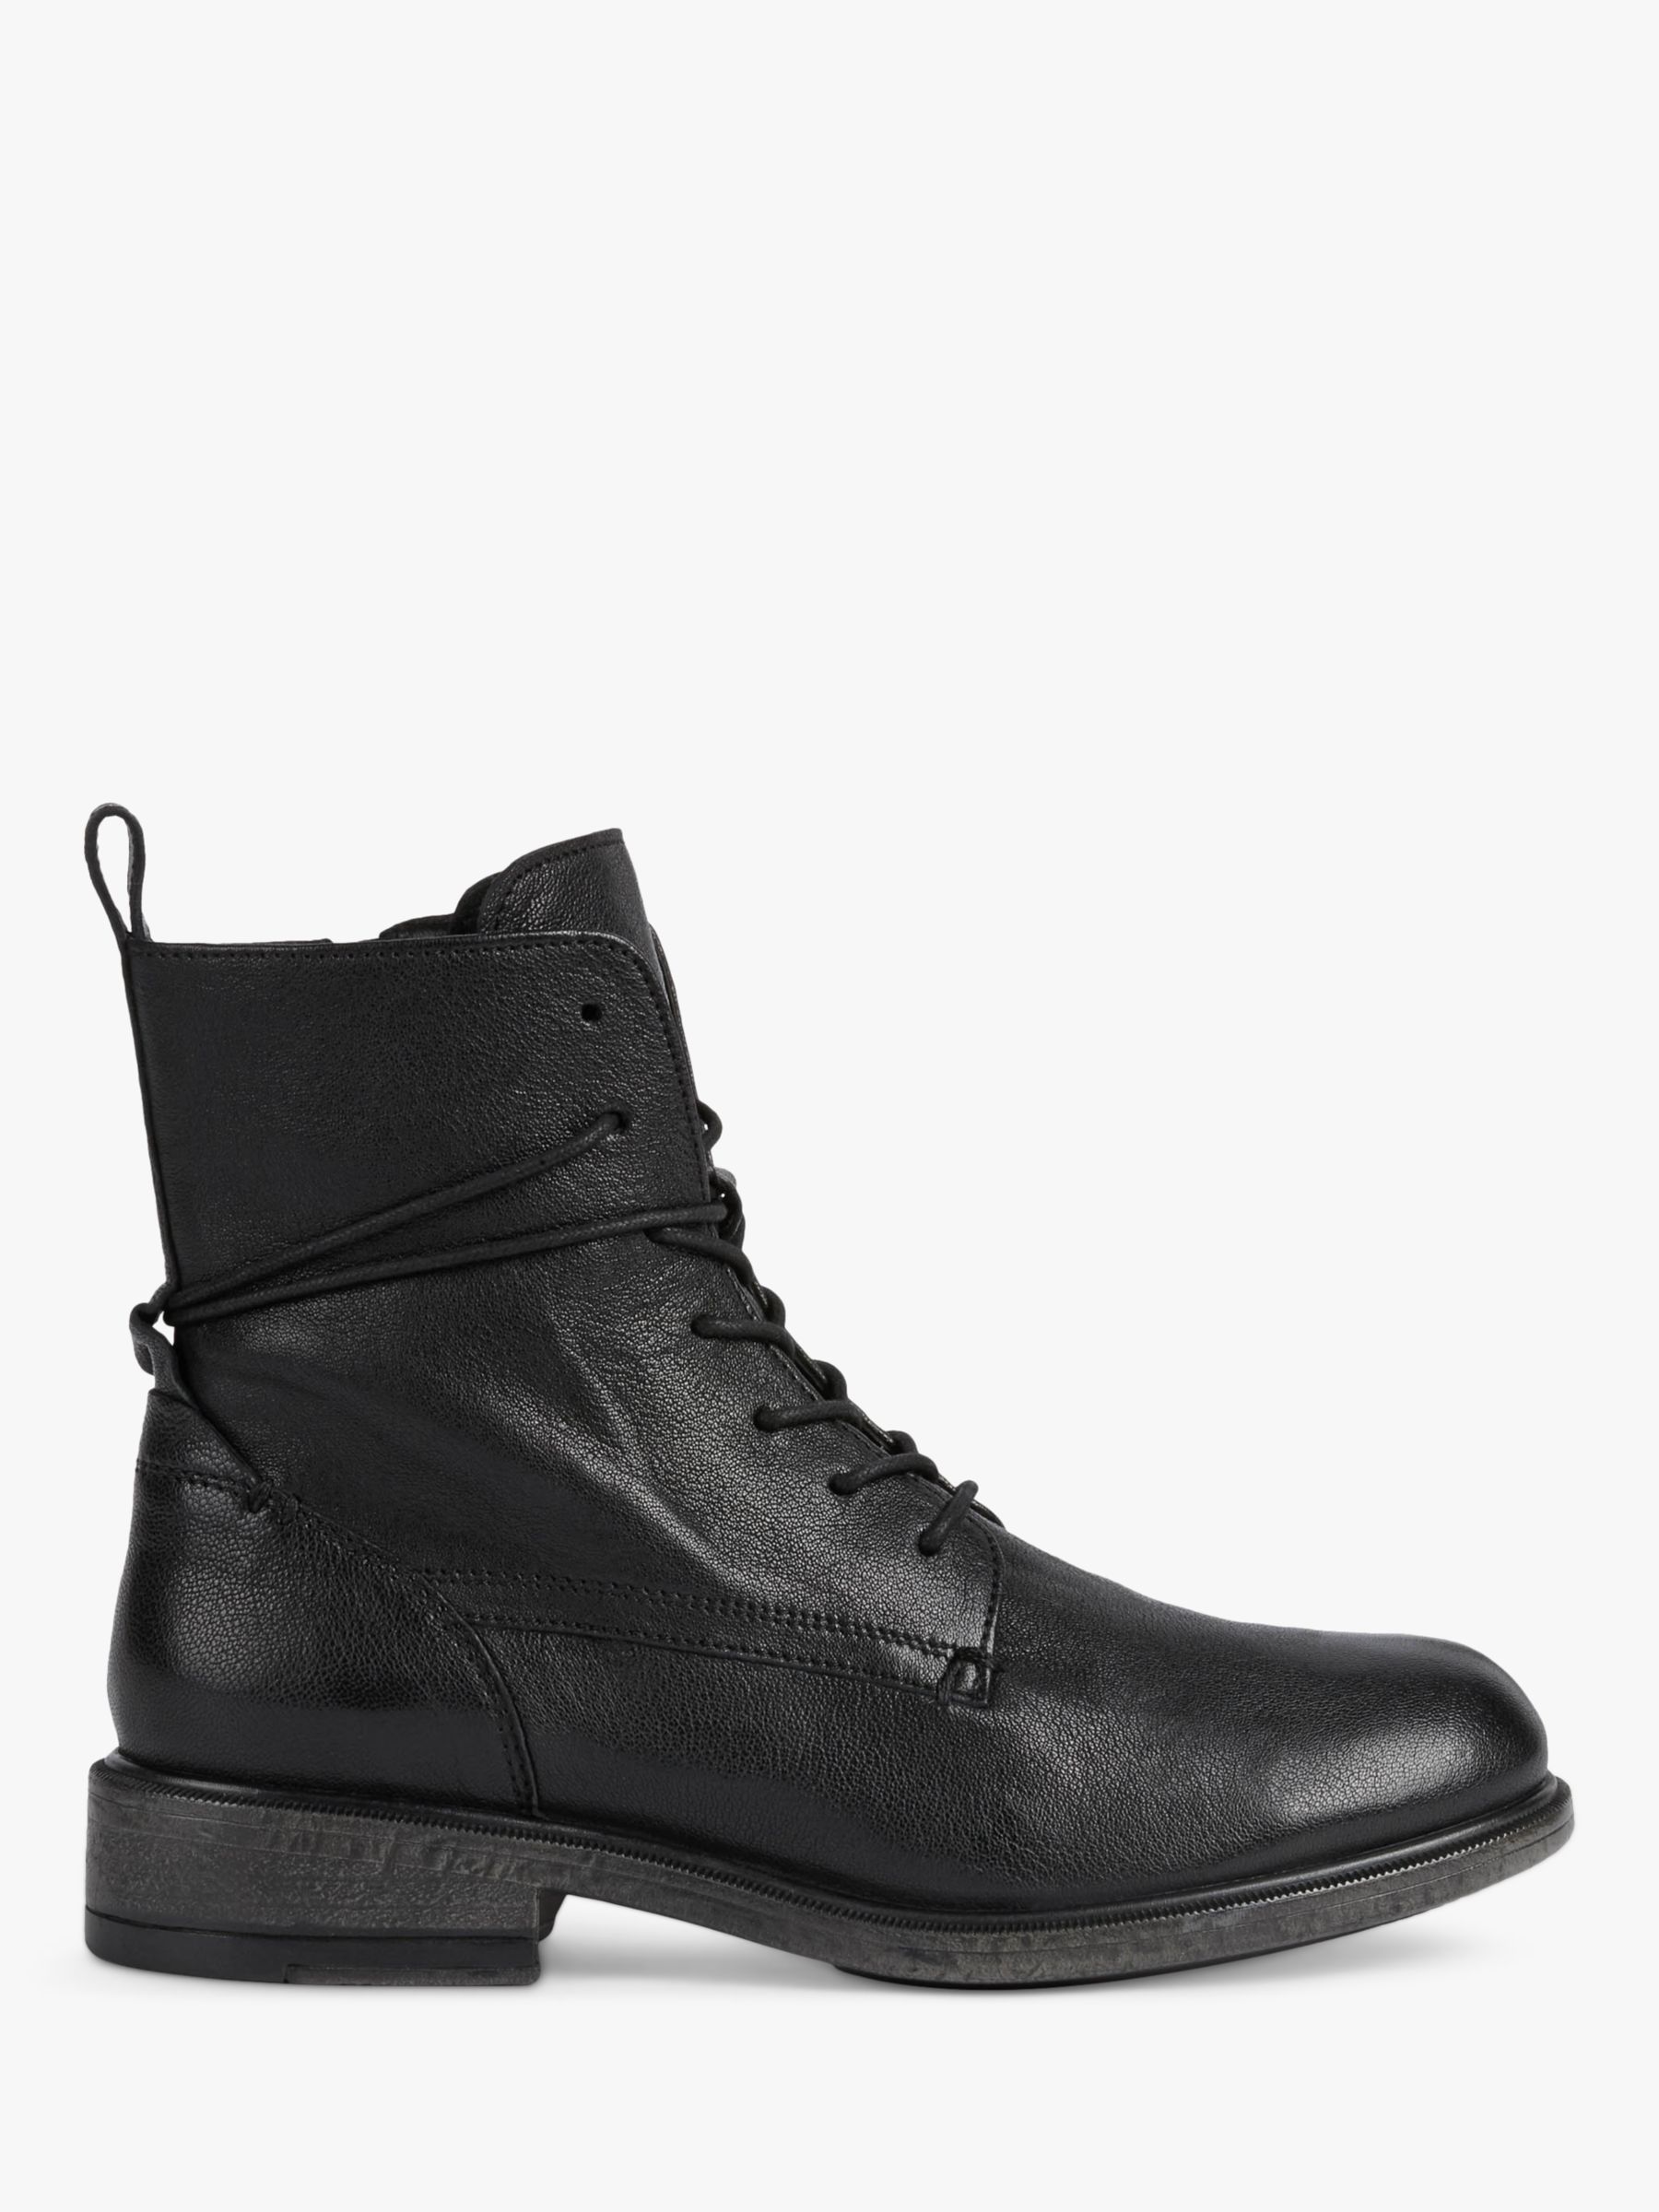 Geox Catria Leather Lace Up Ankle Boots, Black at John Lewis & Partners